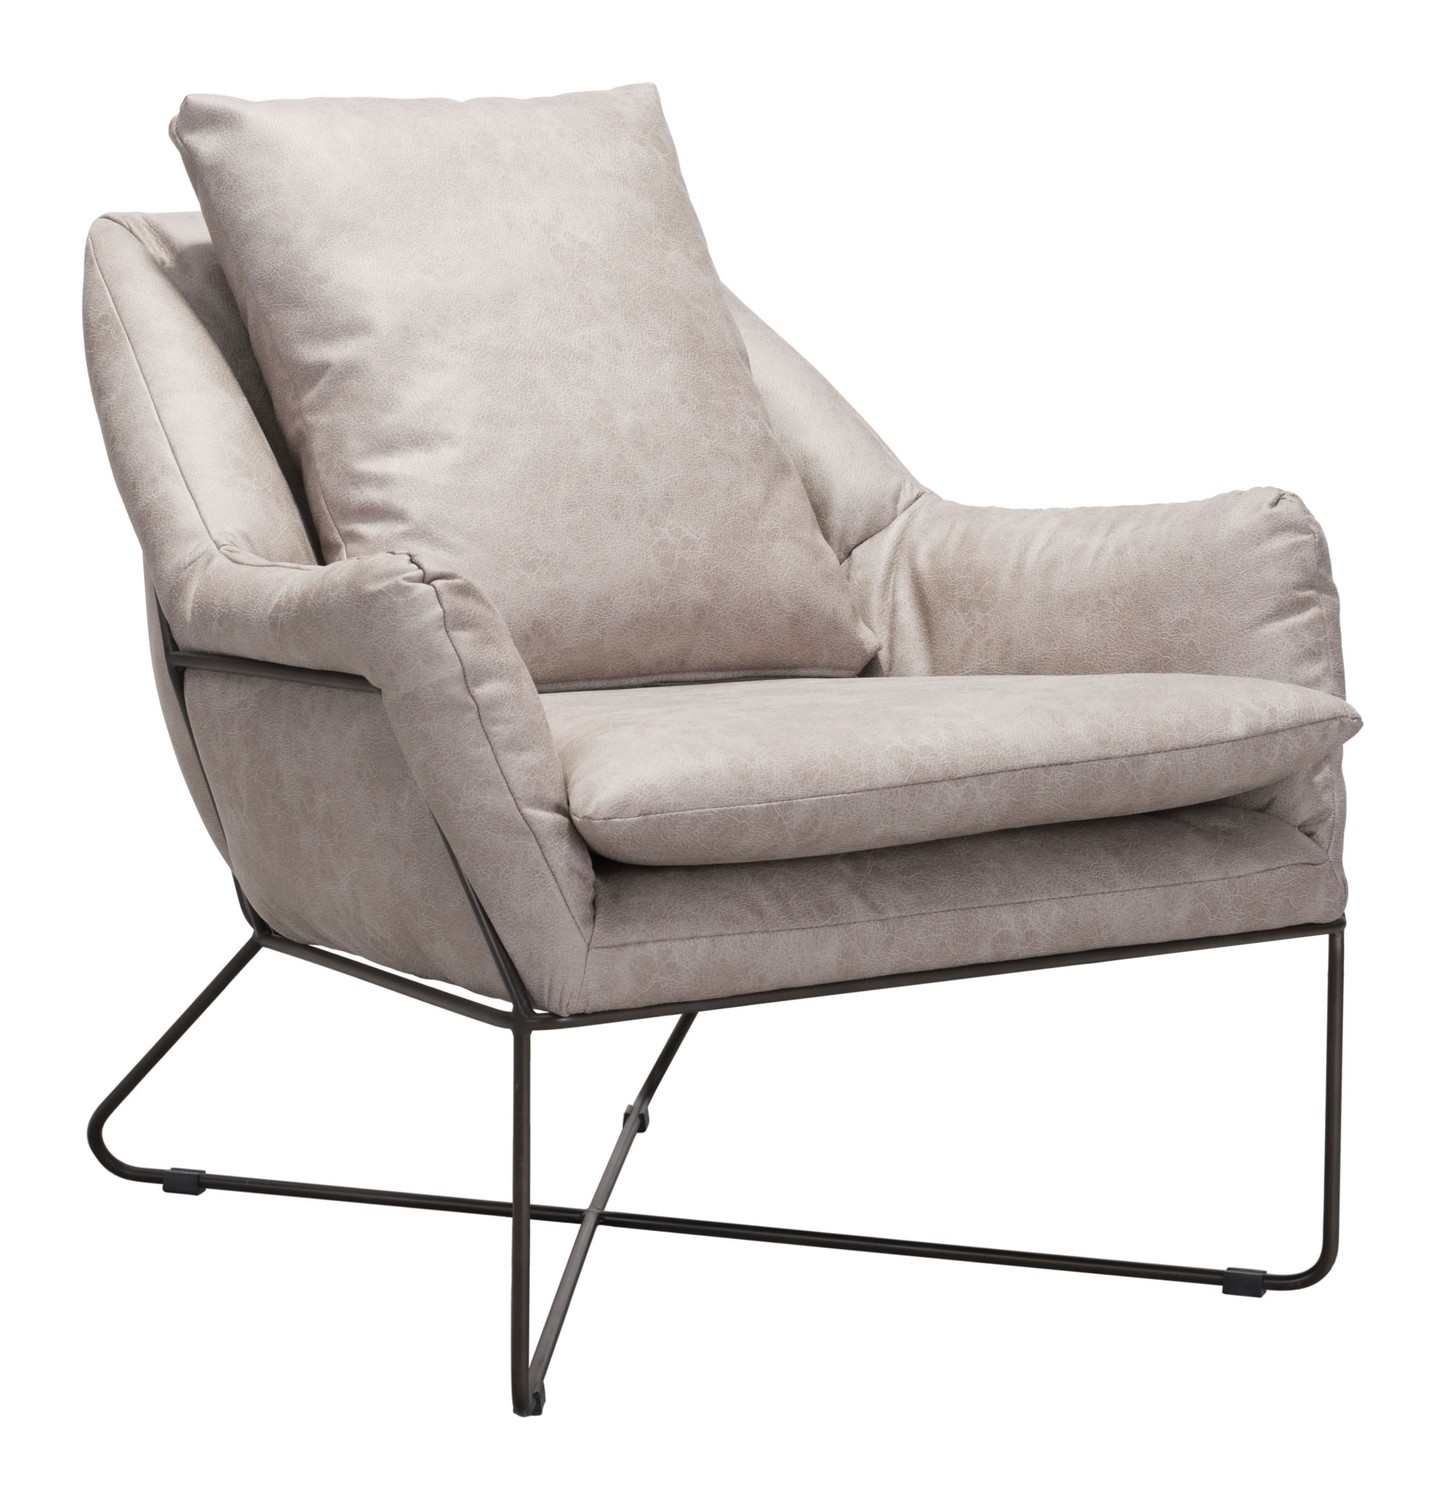 31.9" x 35.8" x 34.3" Distressed Gray, Leatherette, Steel, Lounge Chair